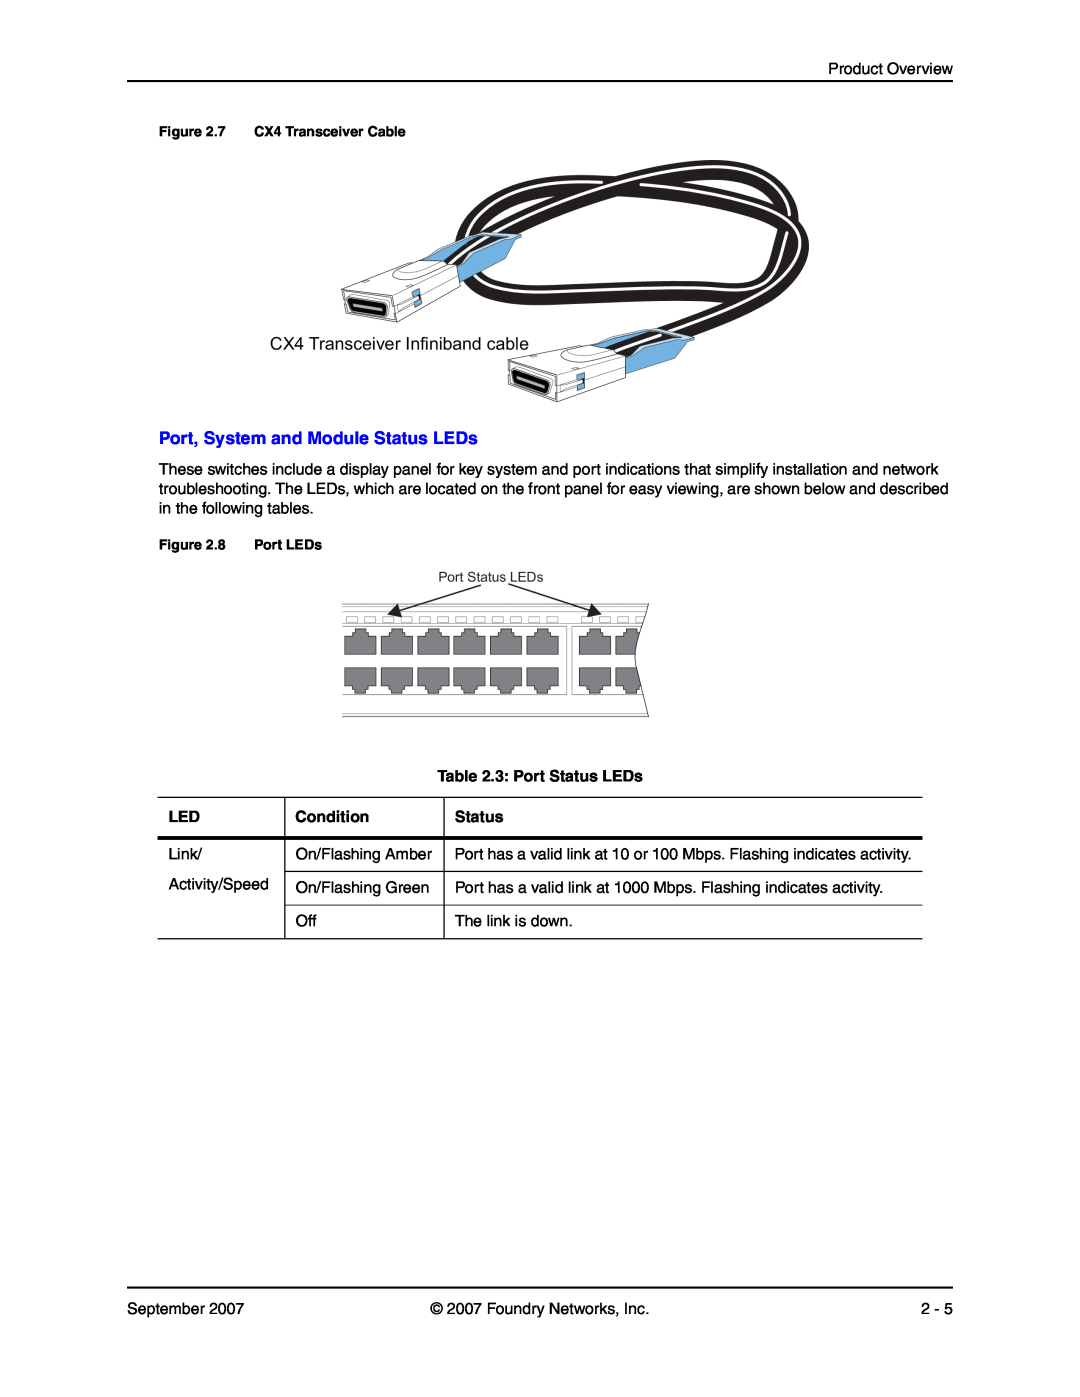 Foundry Networks LS 648, LS 624 Port, System and Module Status LEDs, CX4 Transceiver Infiniband cable, 3 Port Status LEDs 